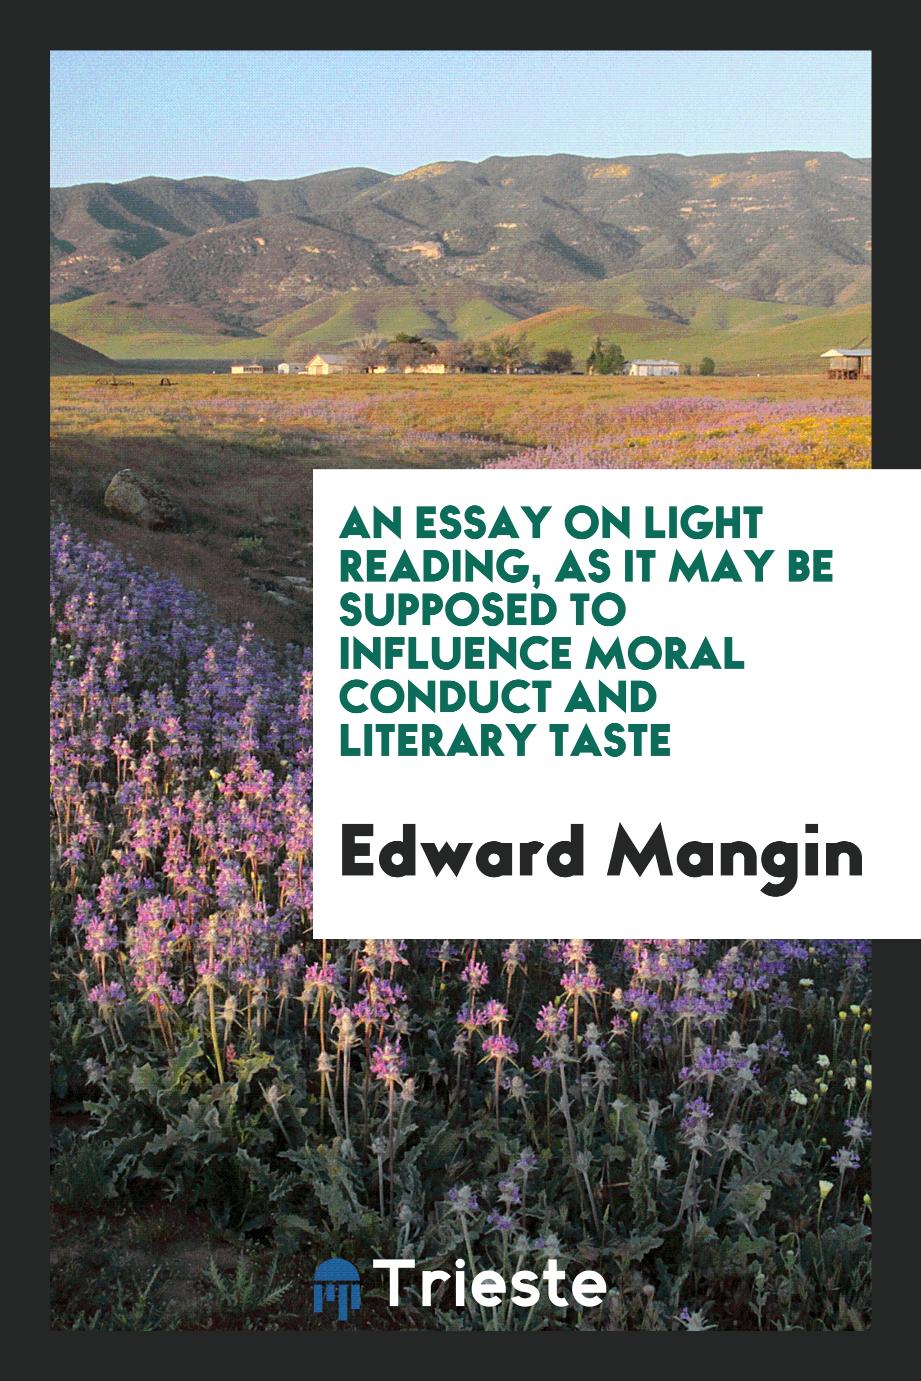 An essay on light reading, as it may be supposed to influence moral conduct and literary taste